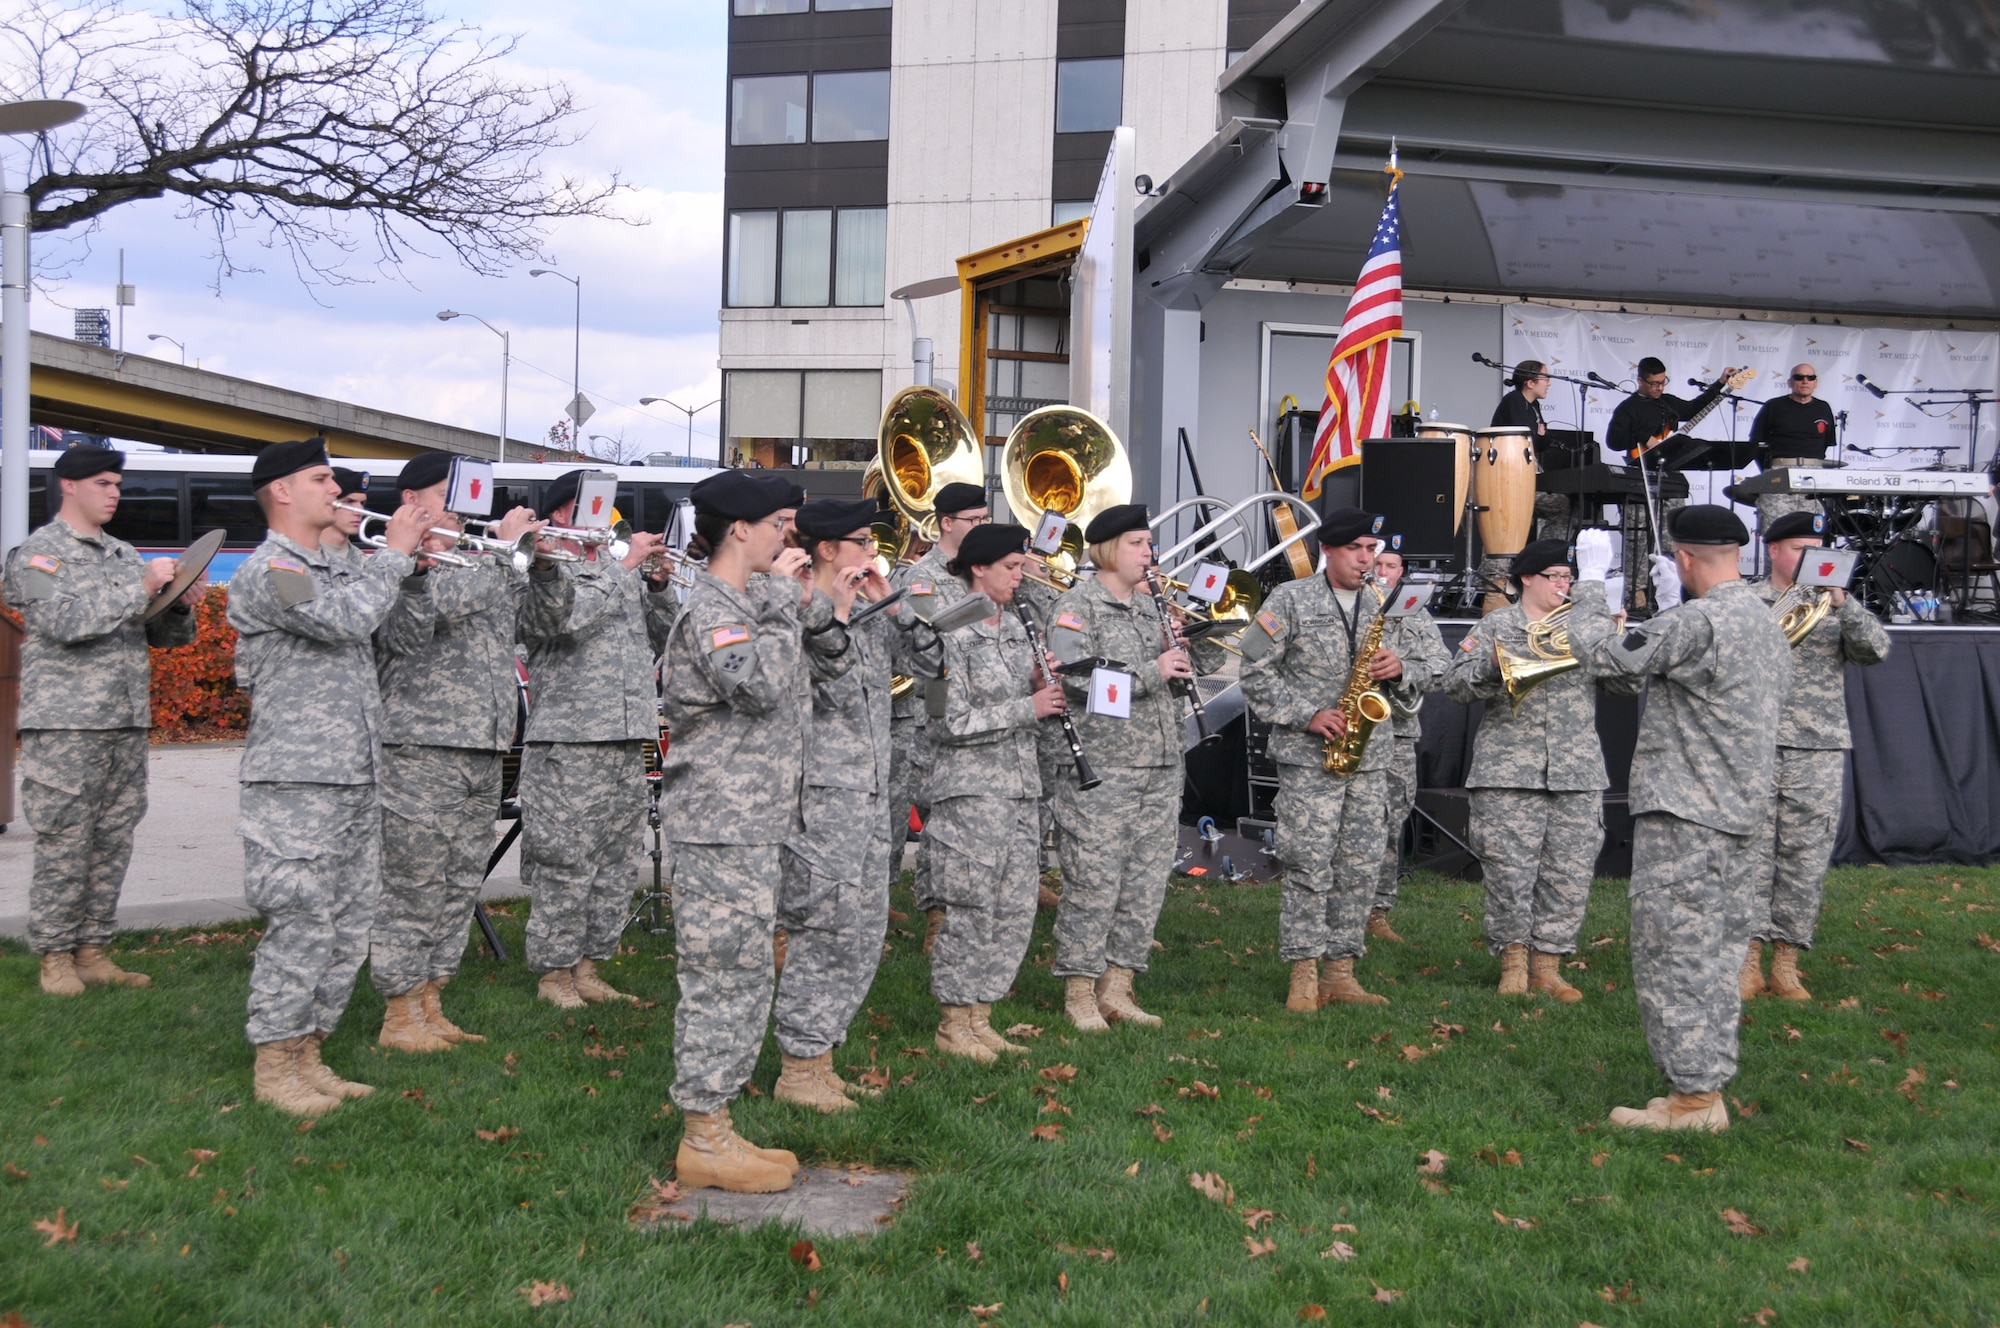 The Pa. Army National Guard 28th Infantry Division Band performs at Steel City Salutes the Troops. The Pennsylvania National Guard joined with the Pennsylvania Department of Conservation of Natural Resources' Point State Park and the Association of the United States Army to organize Steel City Salutes the Troops, Pittsburgh, Nov. 7, 2015. (U.S. Air National Guard Photo by Staff Sgt. Ryan Conley)